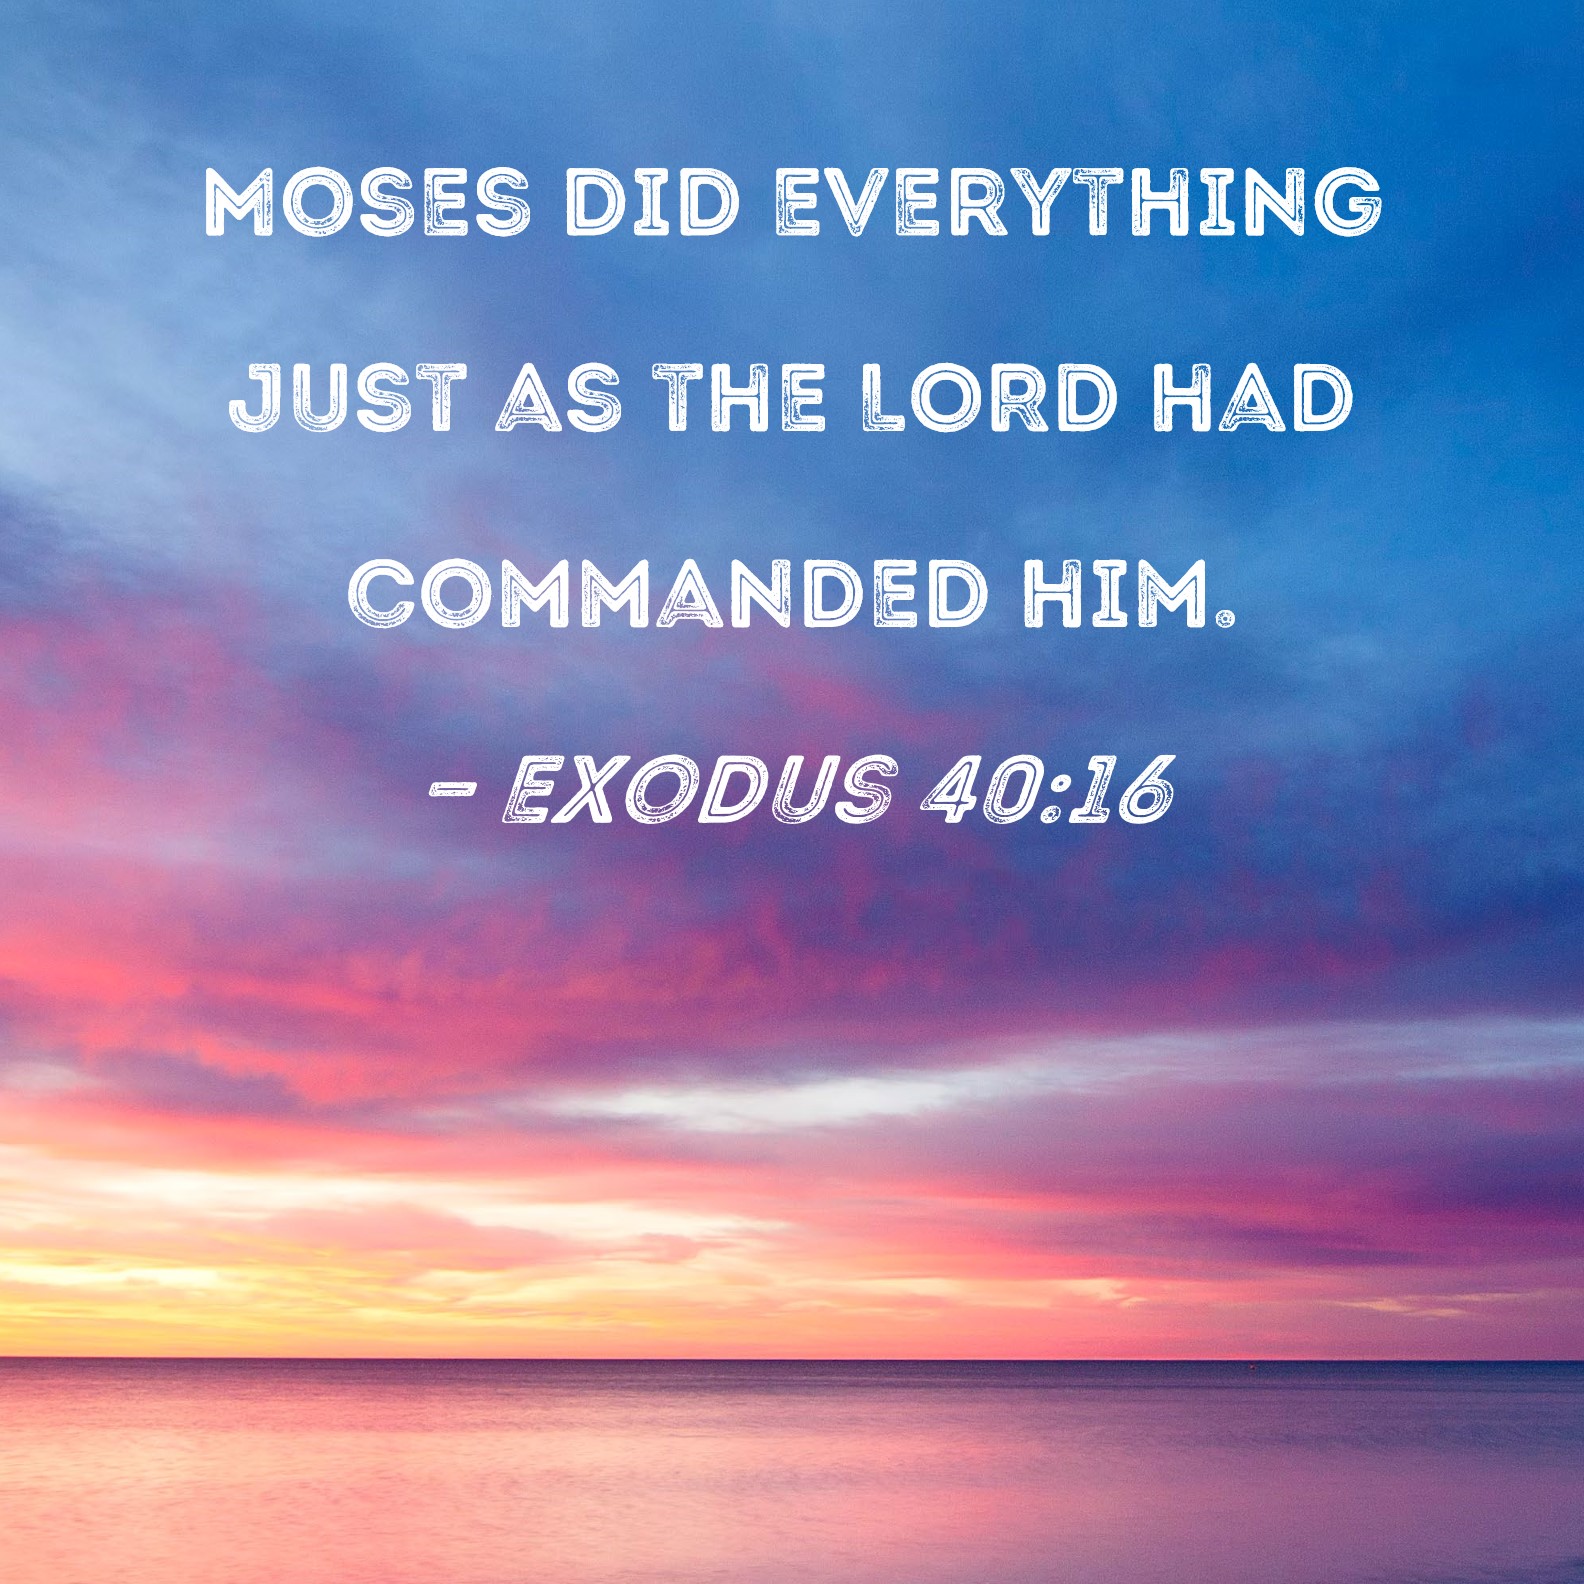 Exodus 40:16 Moses did everything just as the LORD had commanded him.